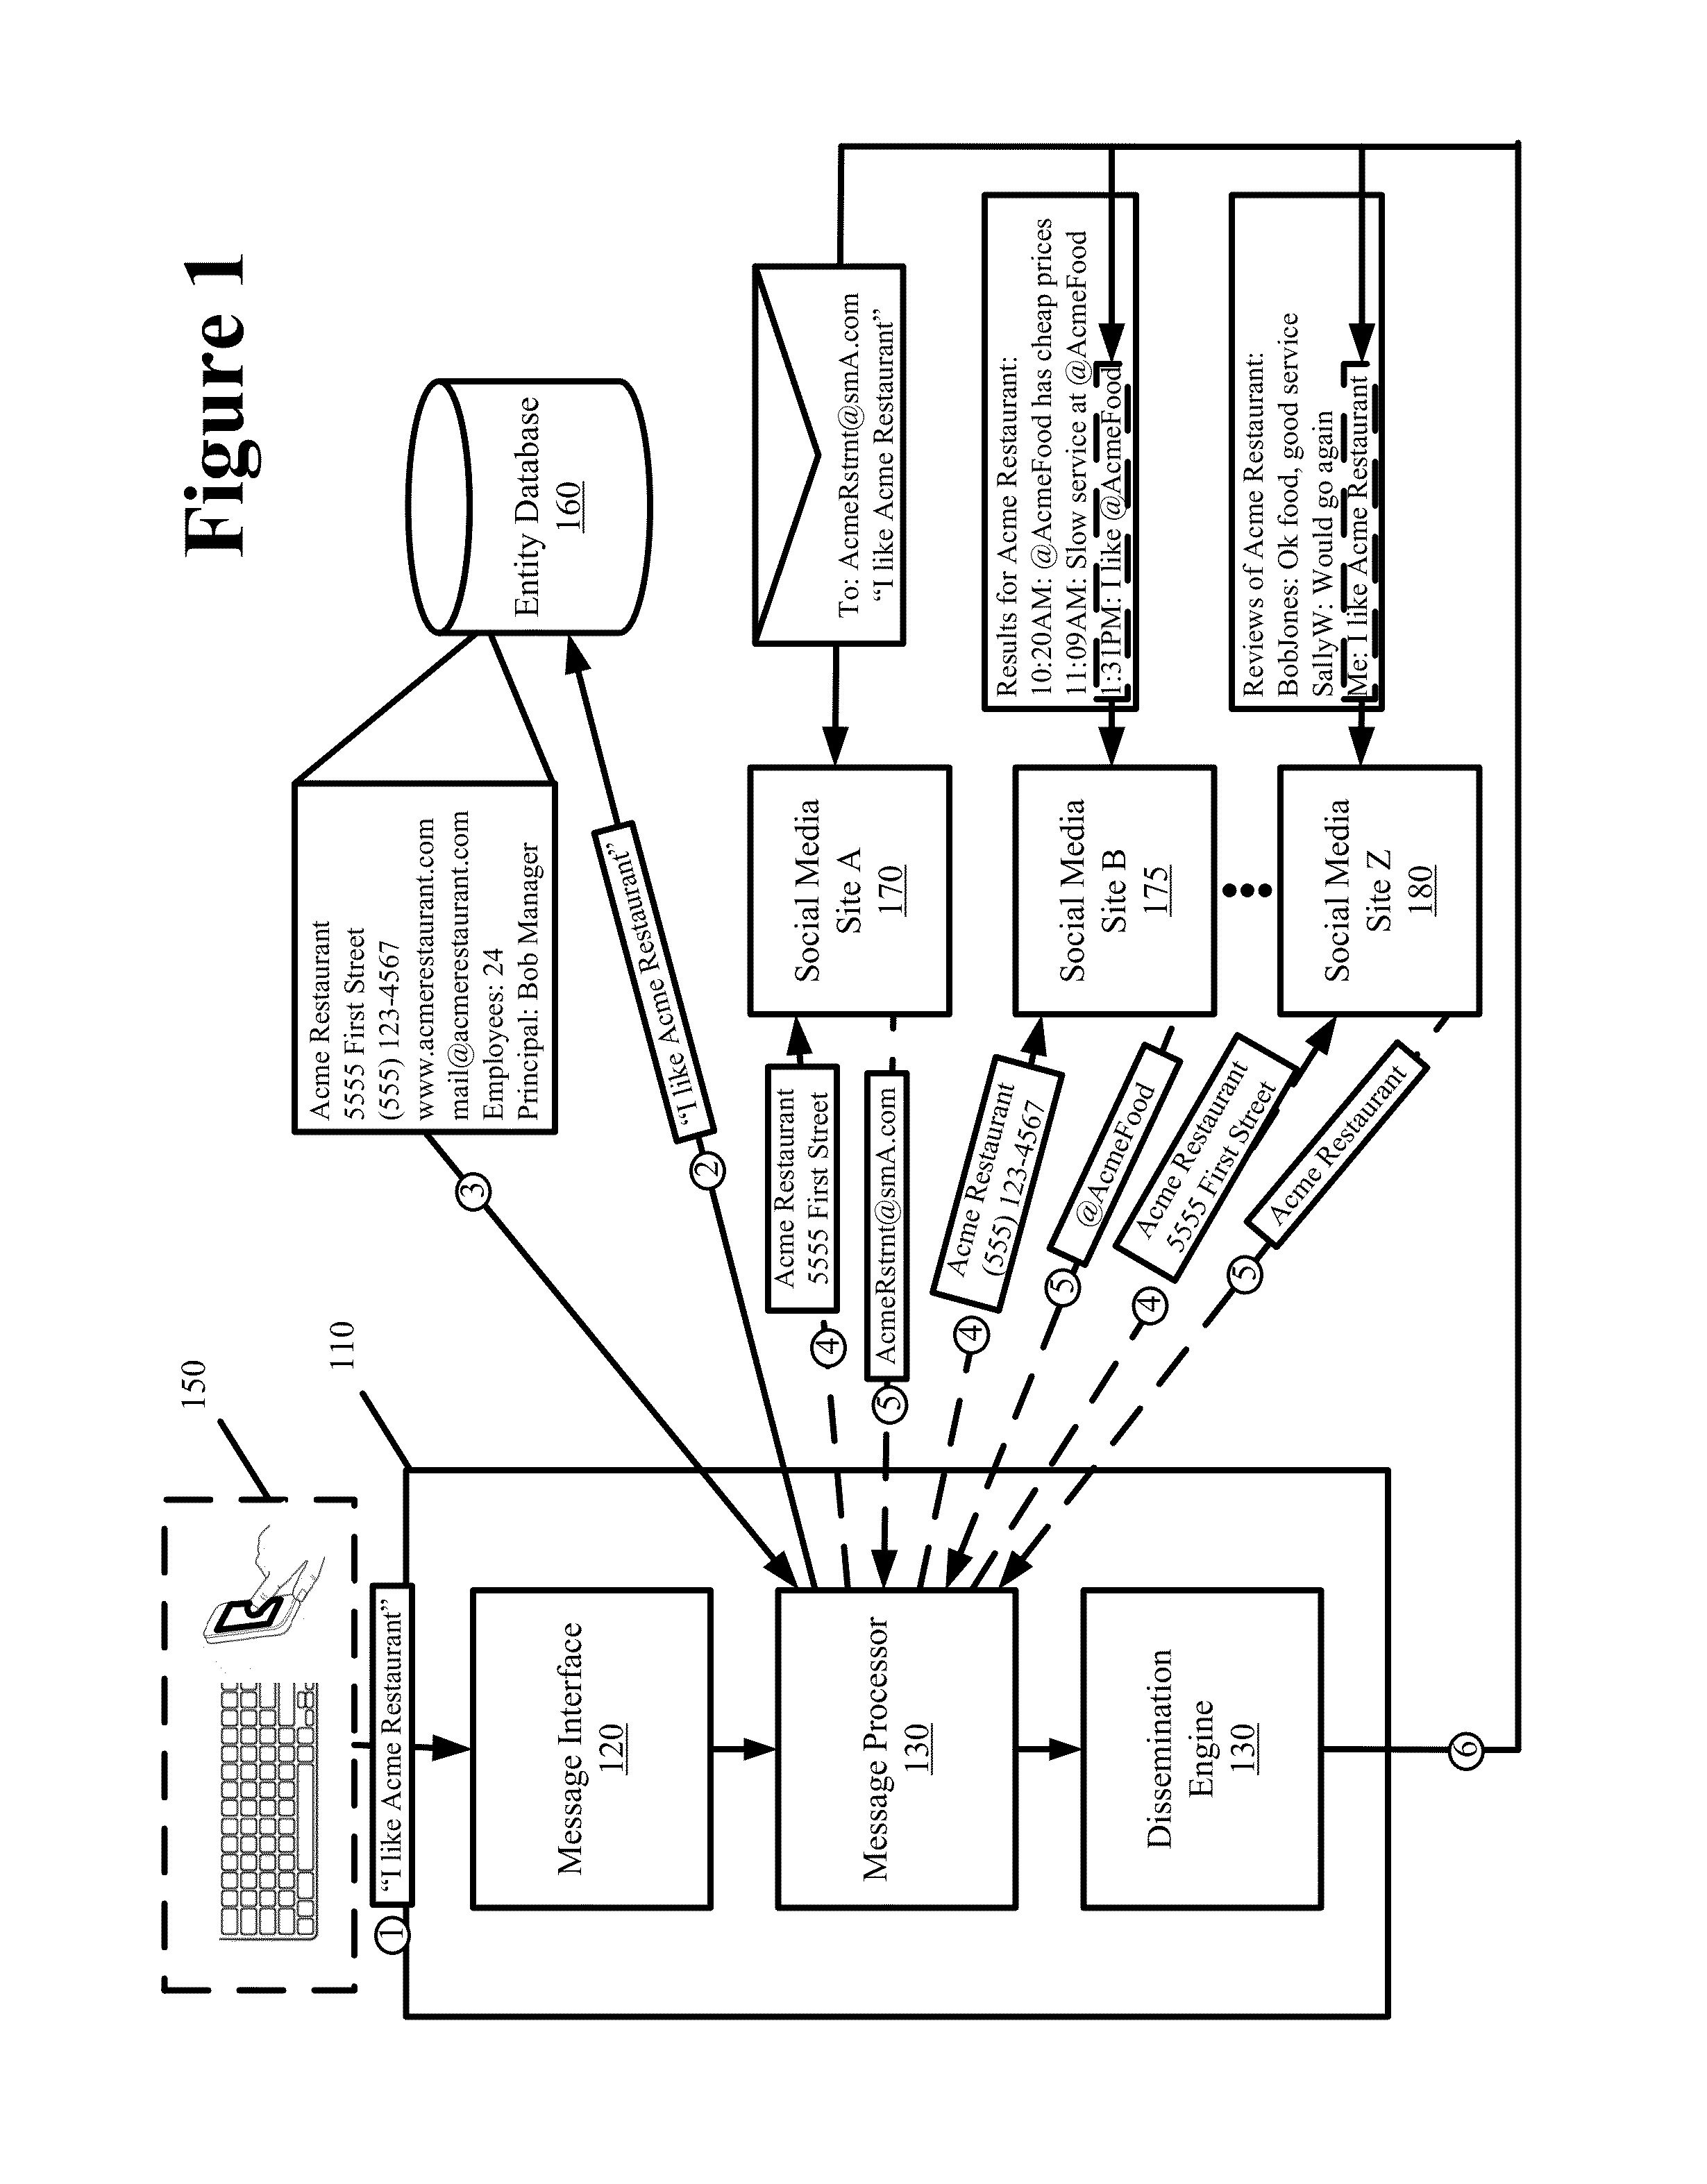 Method and system for directly targeting and blasting messages to automatically identified entities on social media